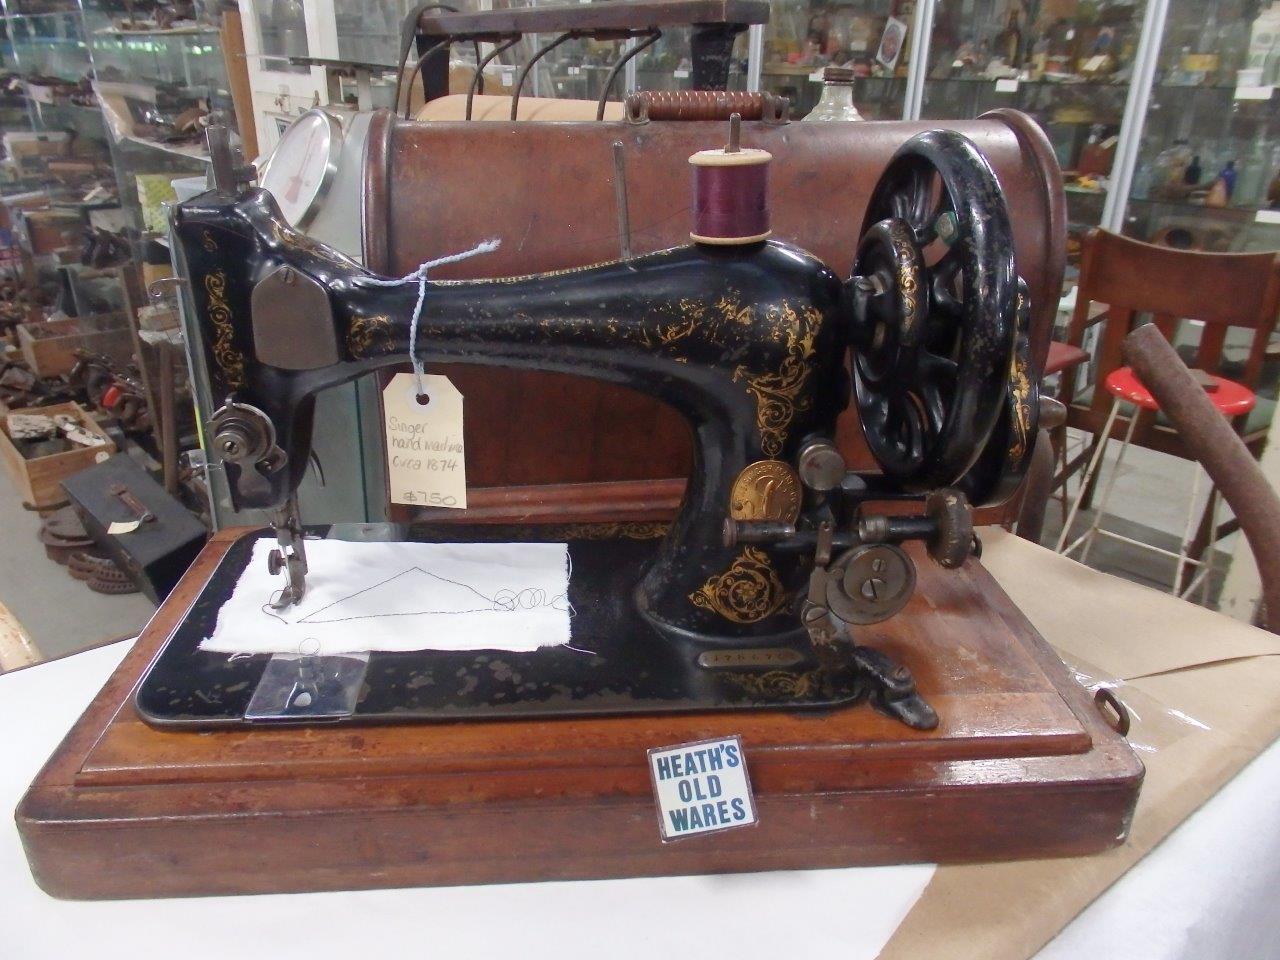 circa 1894 hand crank antique singer sewing machine in working order for sale at Heath's Old Wares , Collectables and Industrial Antiques 19-21 Broadway Burringbar, Open 7 Days Ph 0266771181